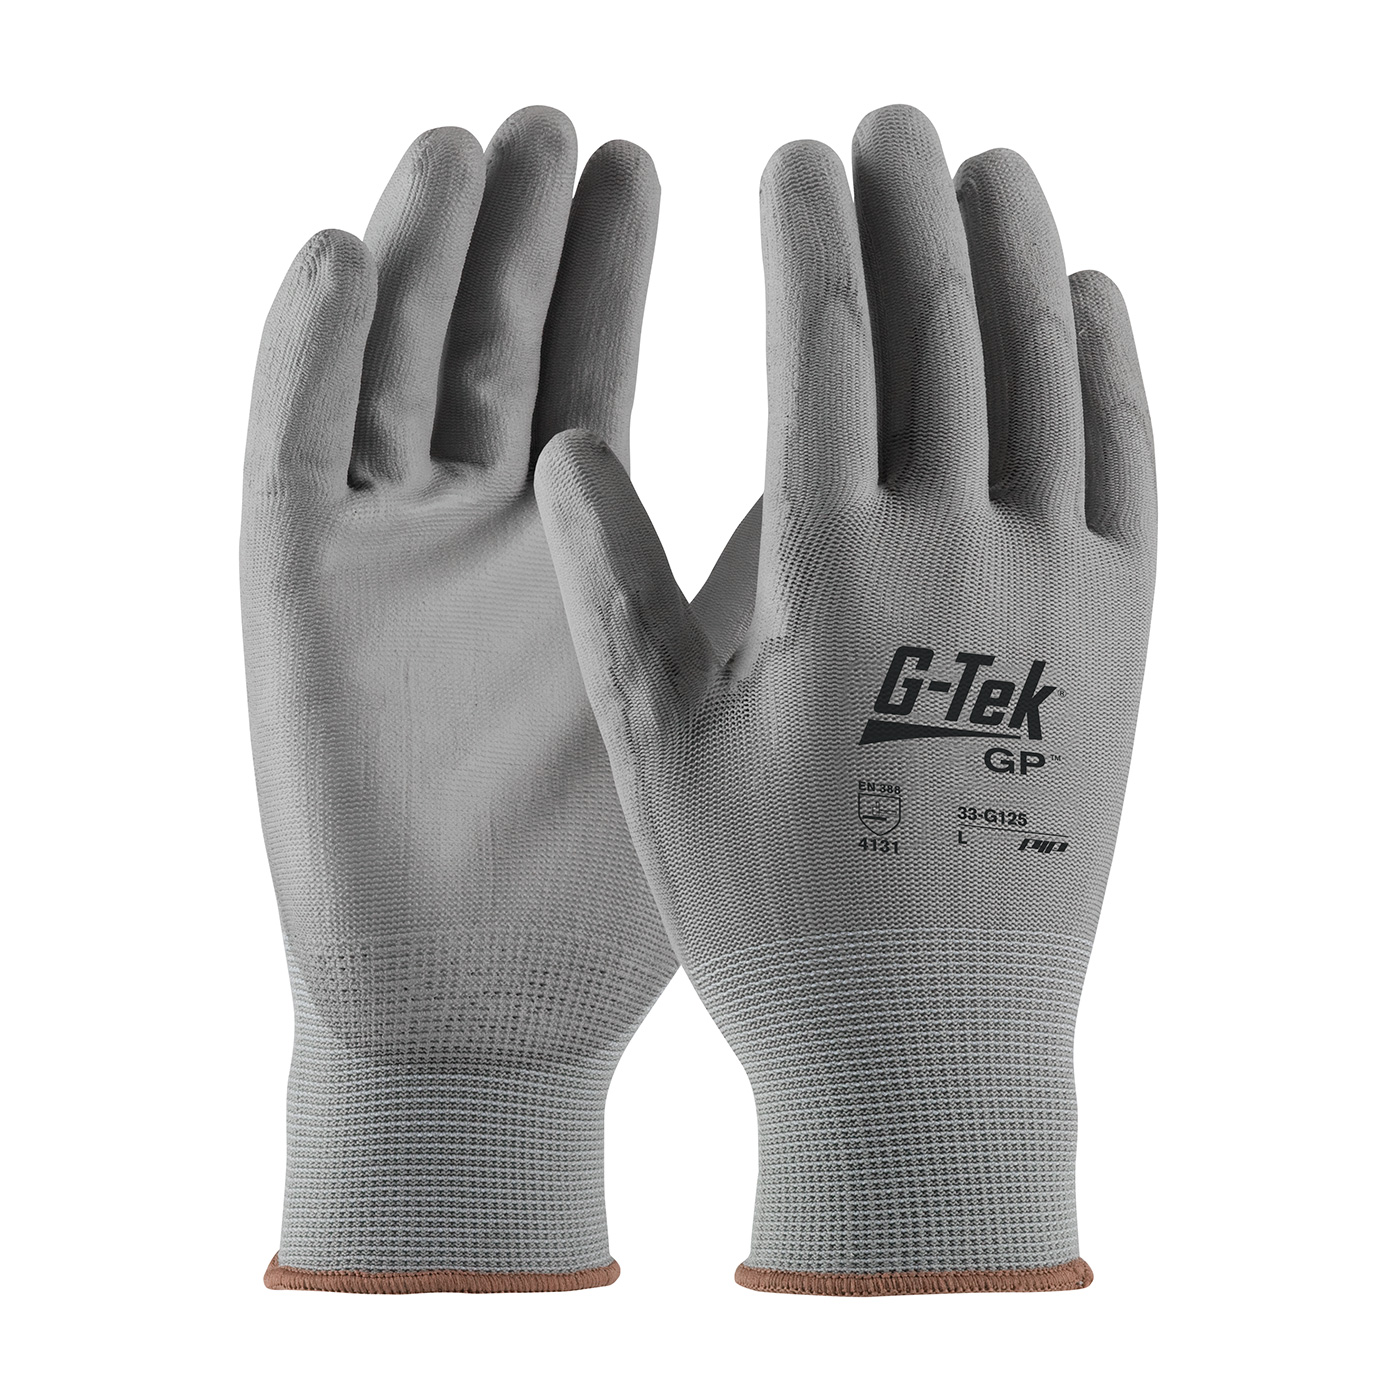 PIP 33-G125/XL G-Tek GP Seamless Knit Nylon Glove with Polyurethane Coated Smooth Grip on Palm & Fingers - X-Large PID-33 G125 XL